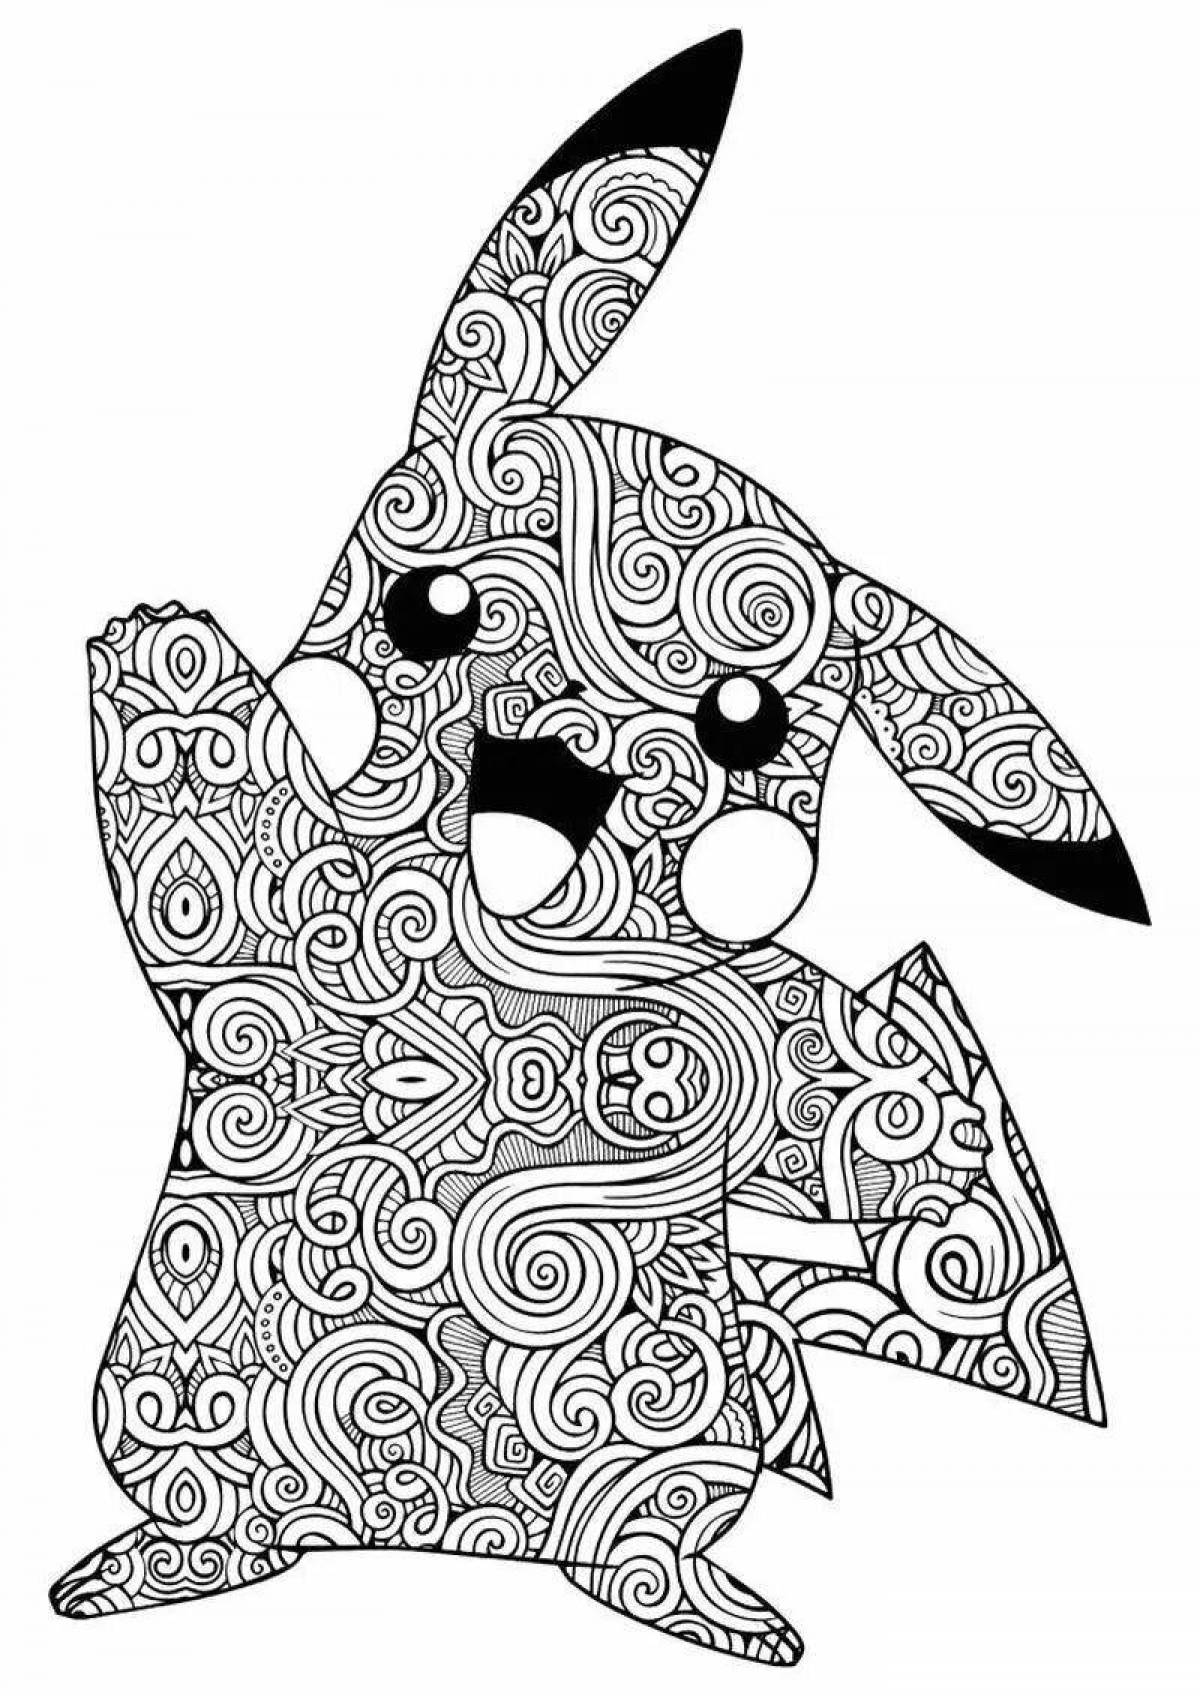 Exciting complex pikachu coloring book